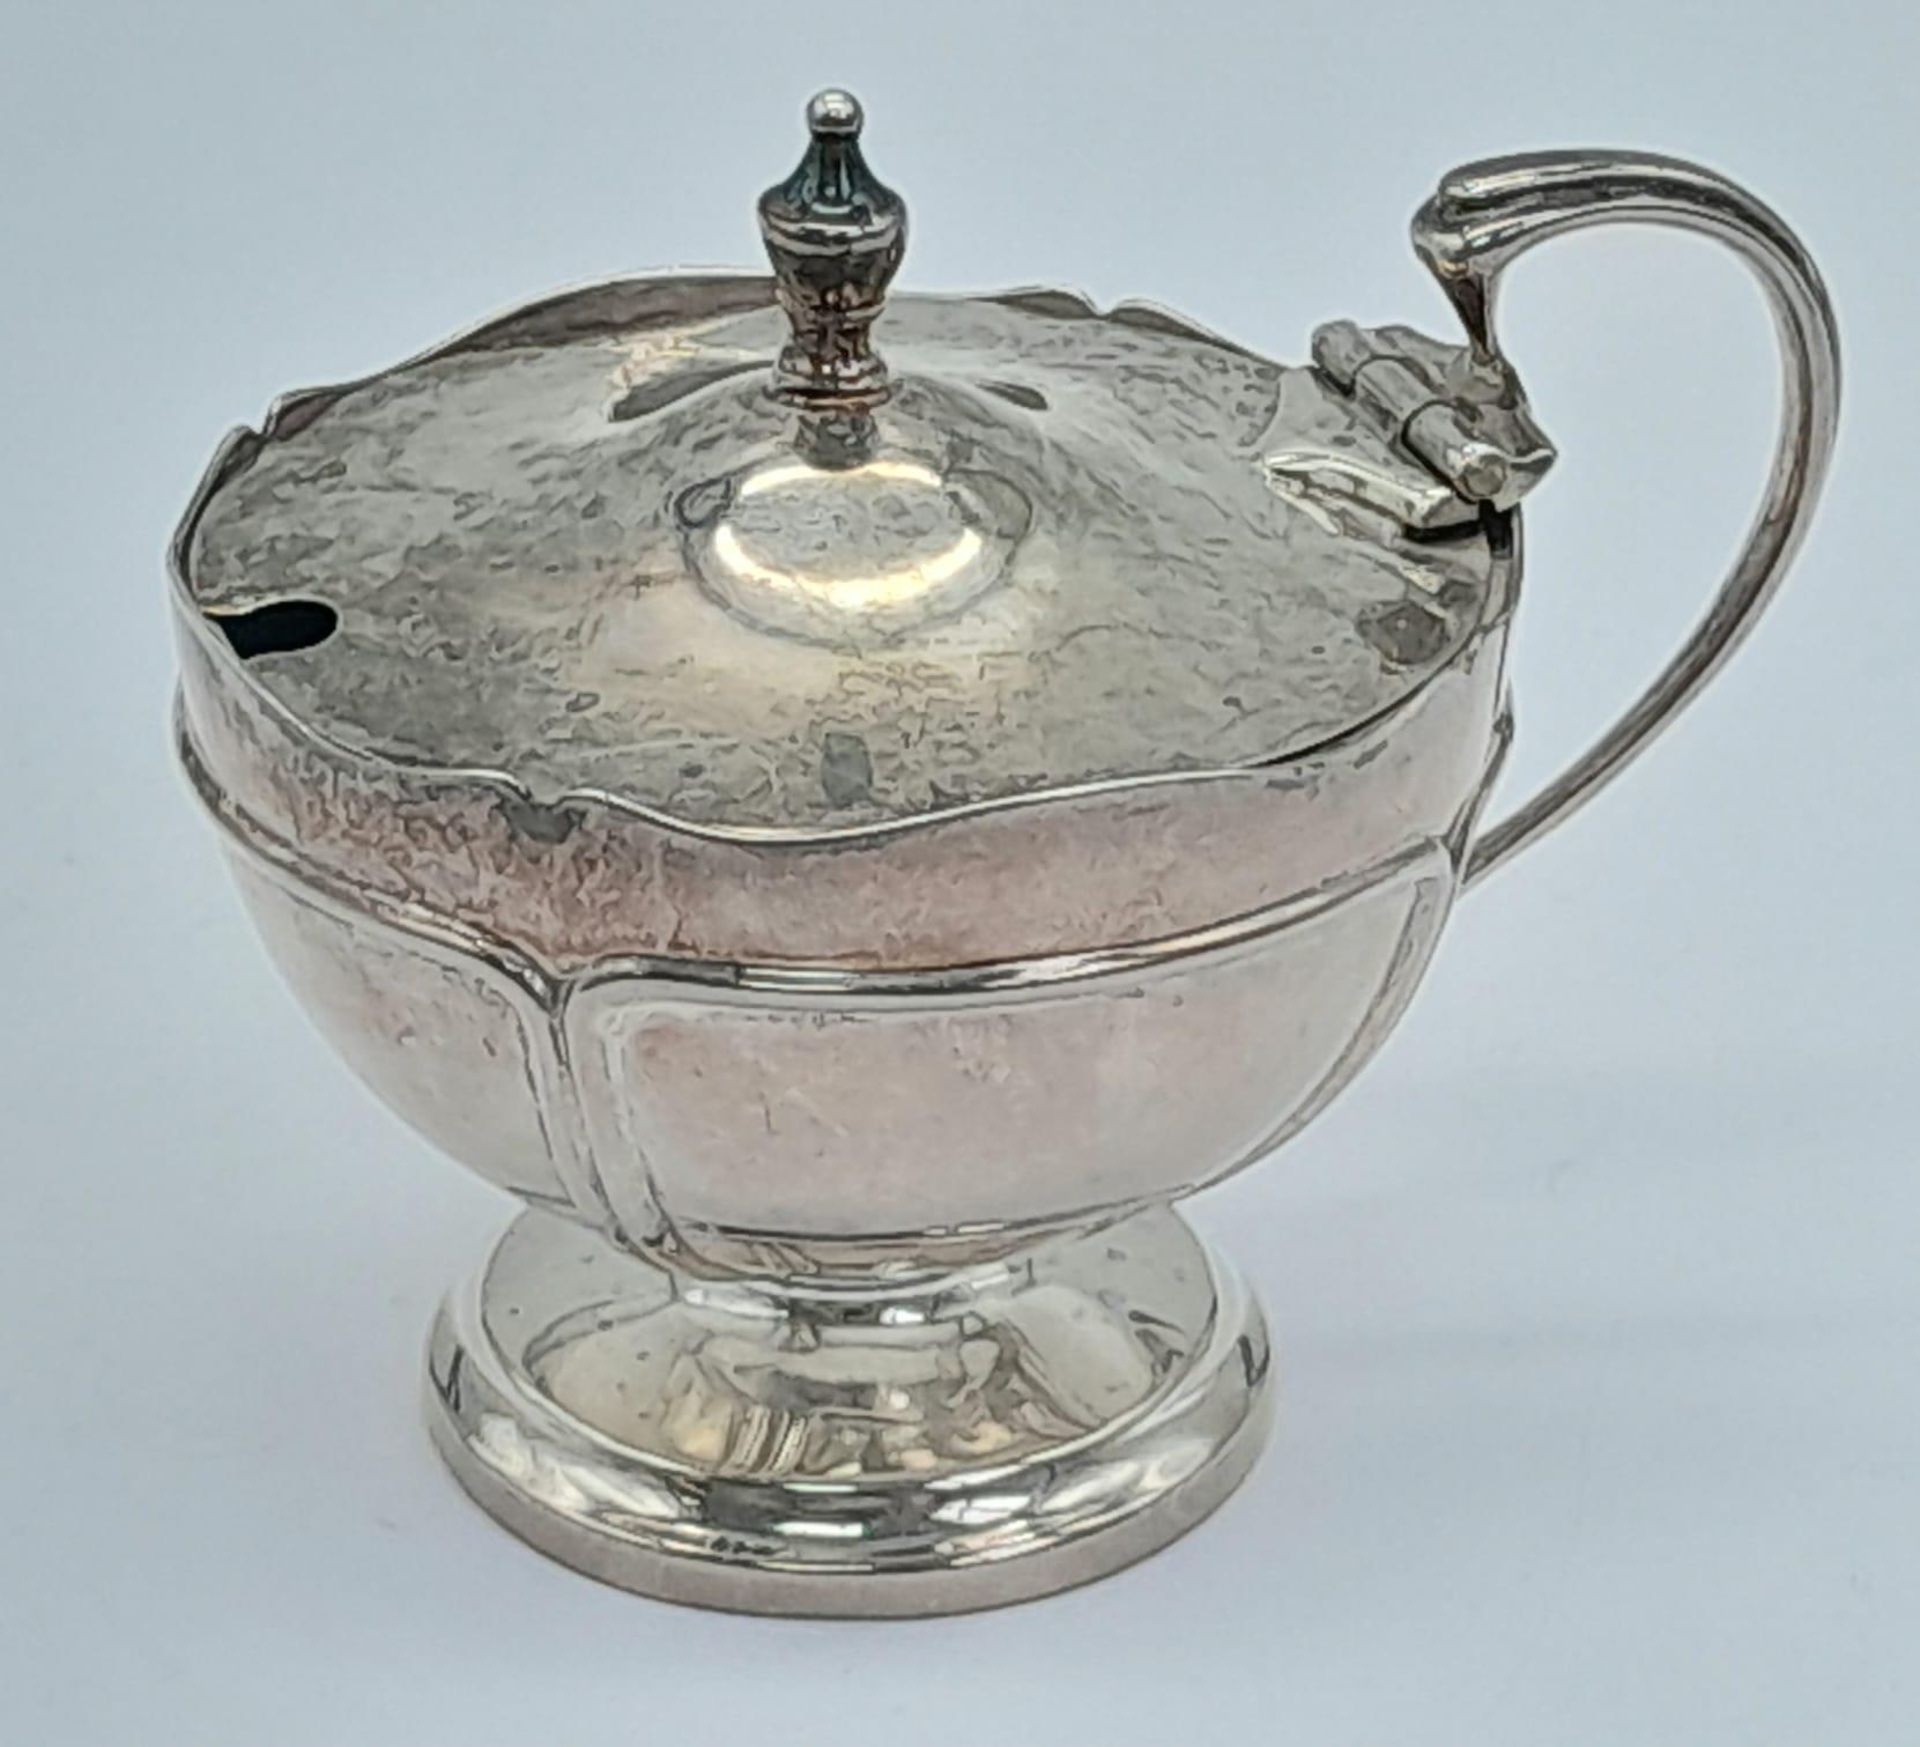 A SILVER FOOTED SALT HALLMARKED BIRMINGHAM 1913 WITH BLUE GLASS LINER BUT MISSING THE SPOON . SILVER